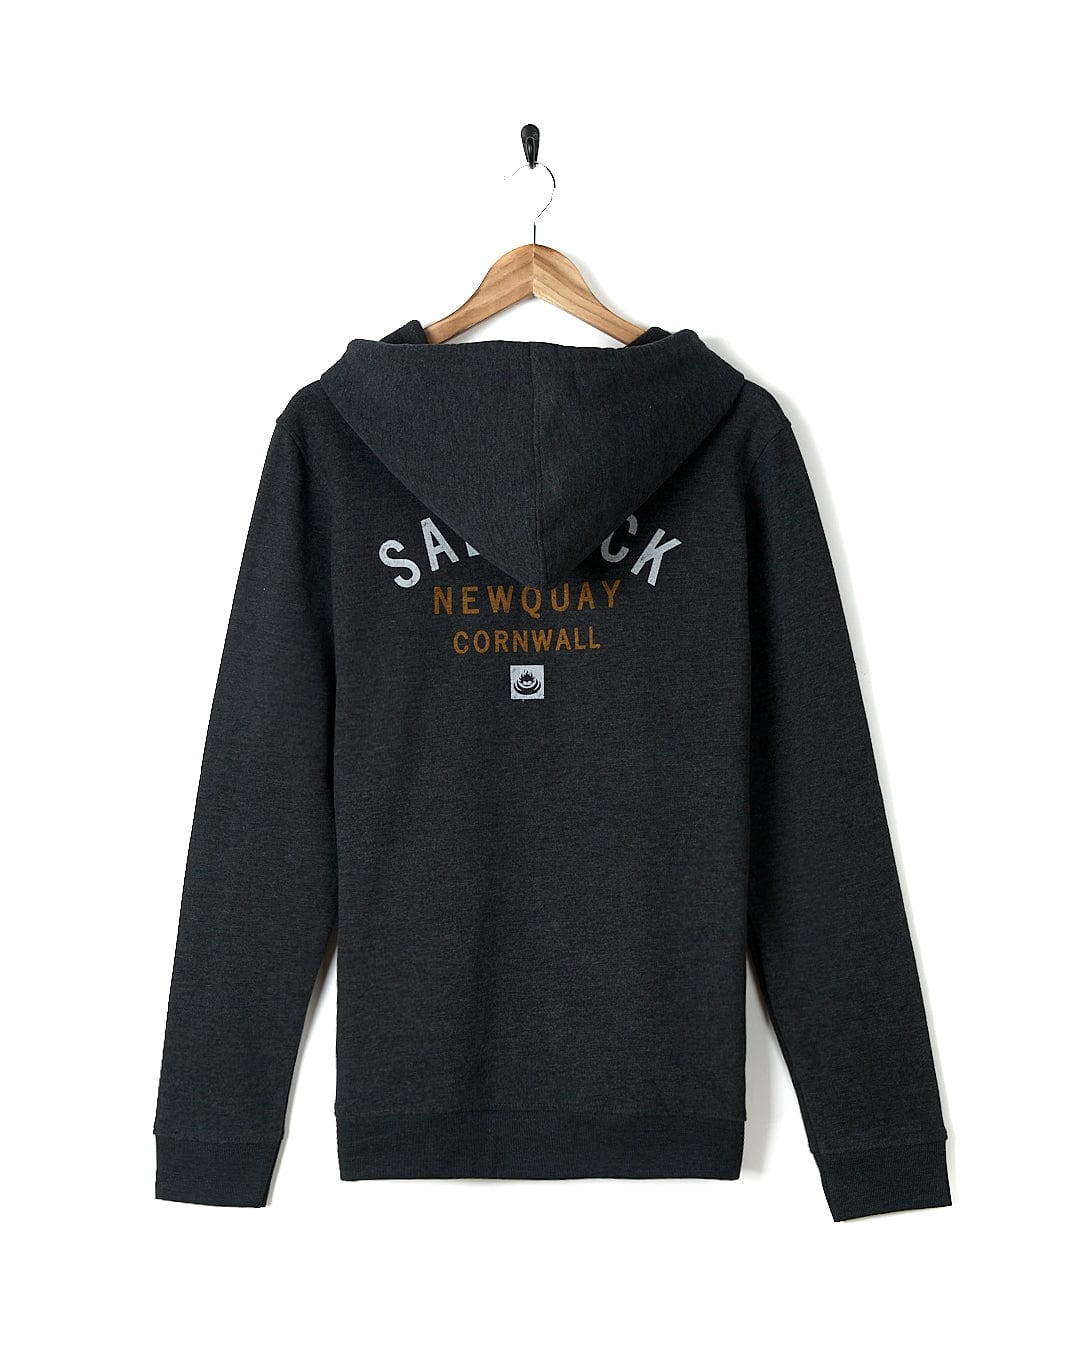 A Saltrock Location Zip Hoodie - Newquay - Dark Grey with the word sailor on it.